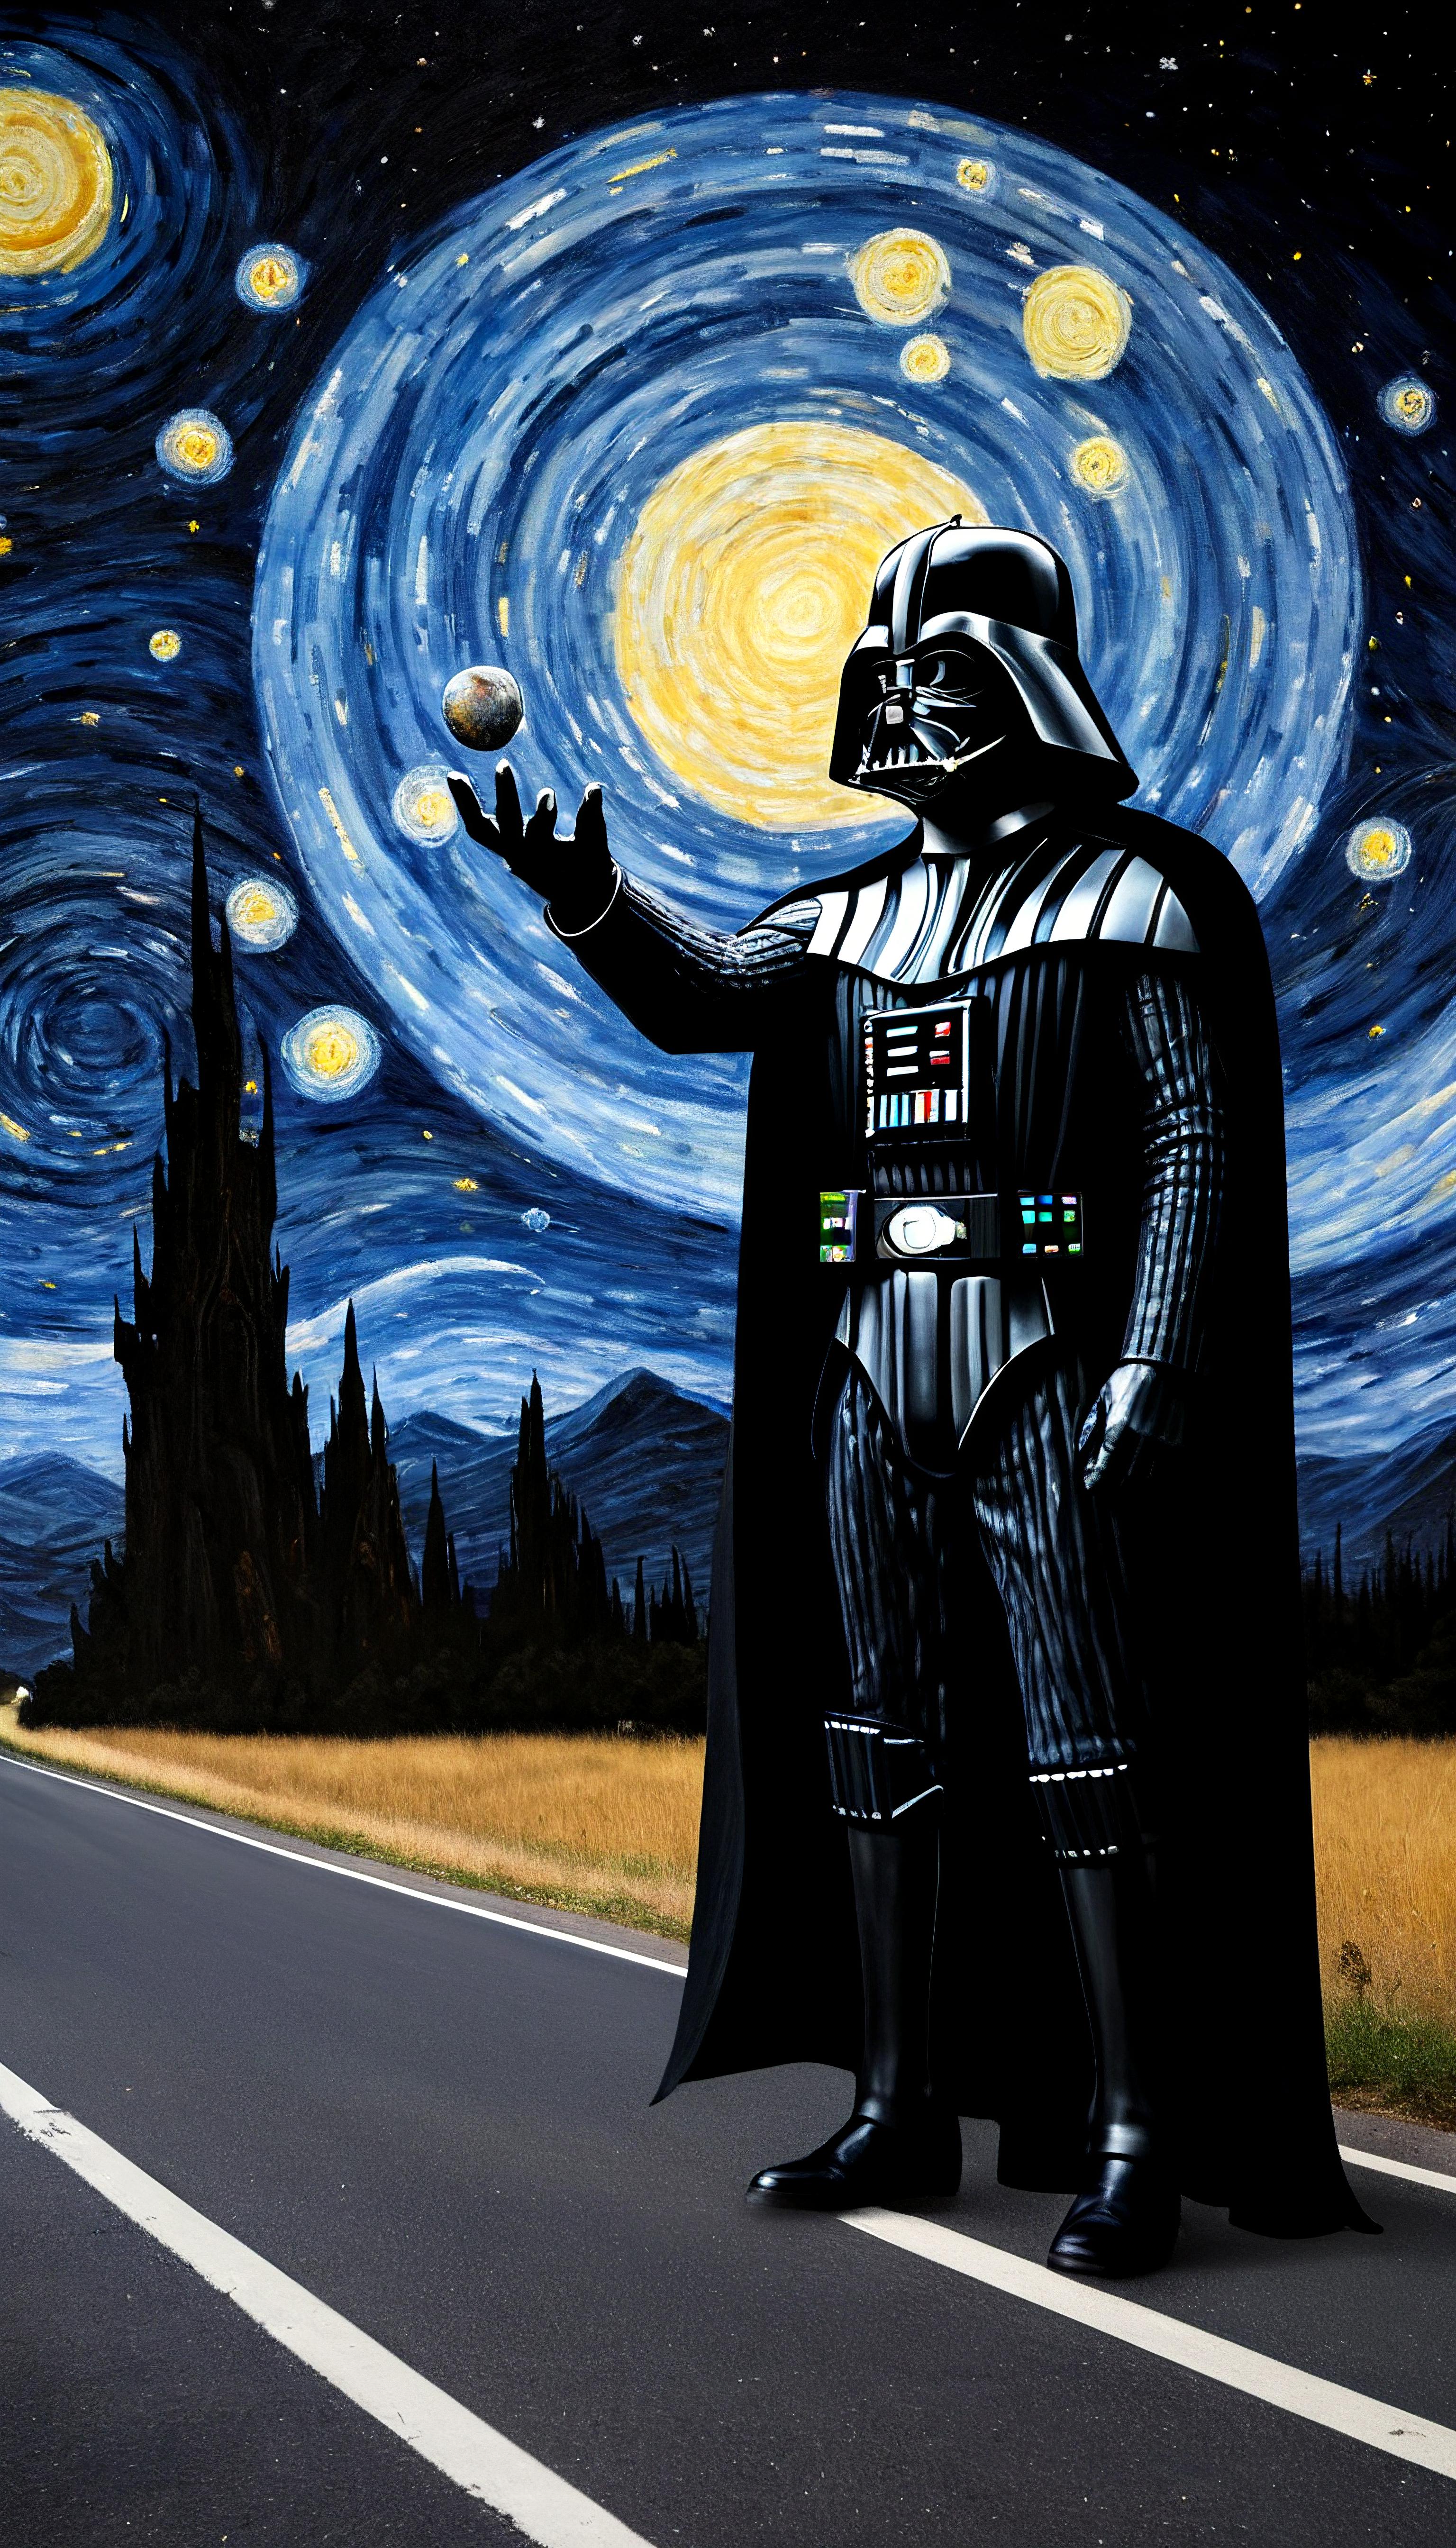 A Star Wars-themed painting featuring Darth Vader holding a star.